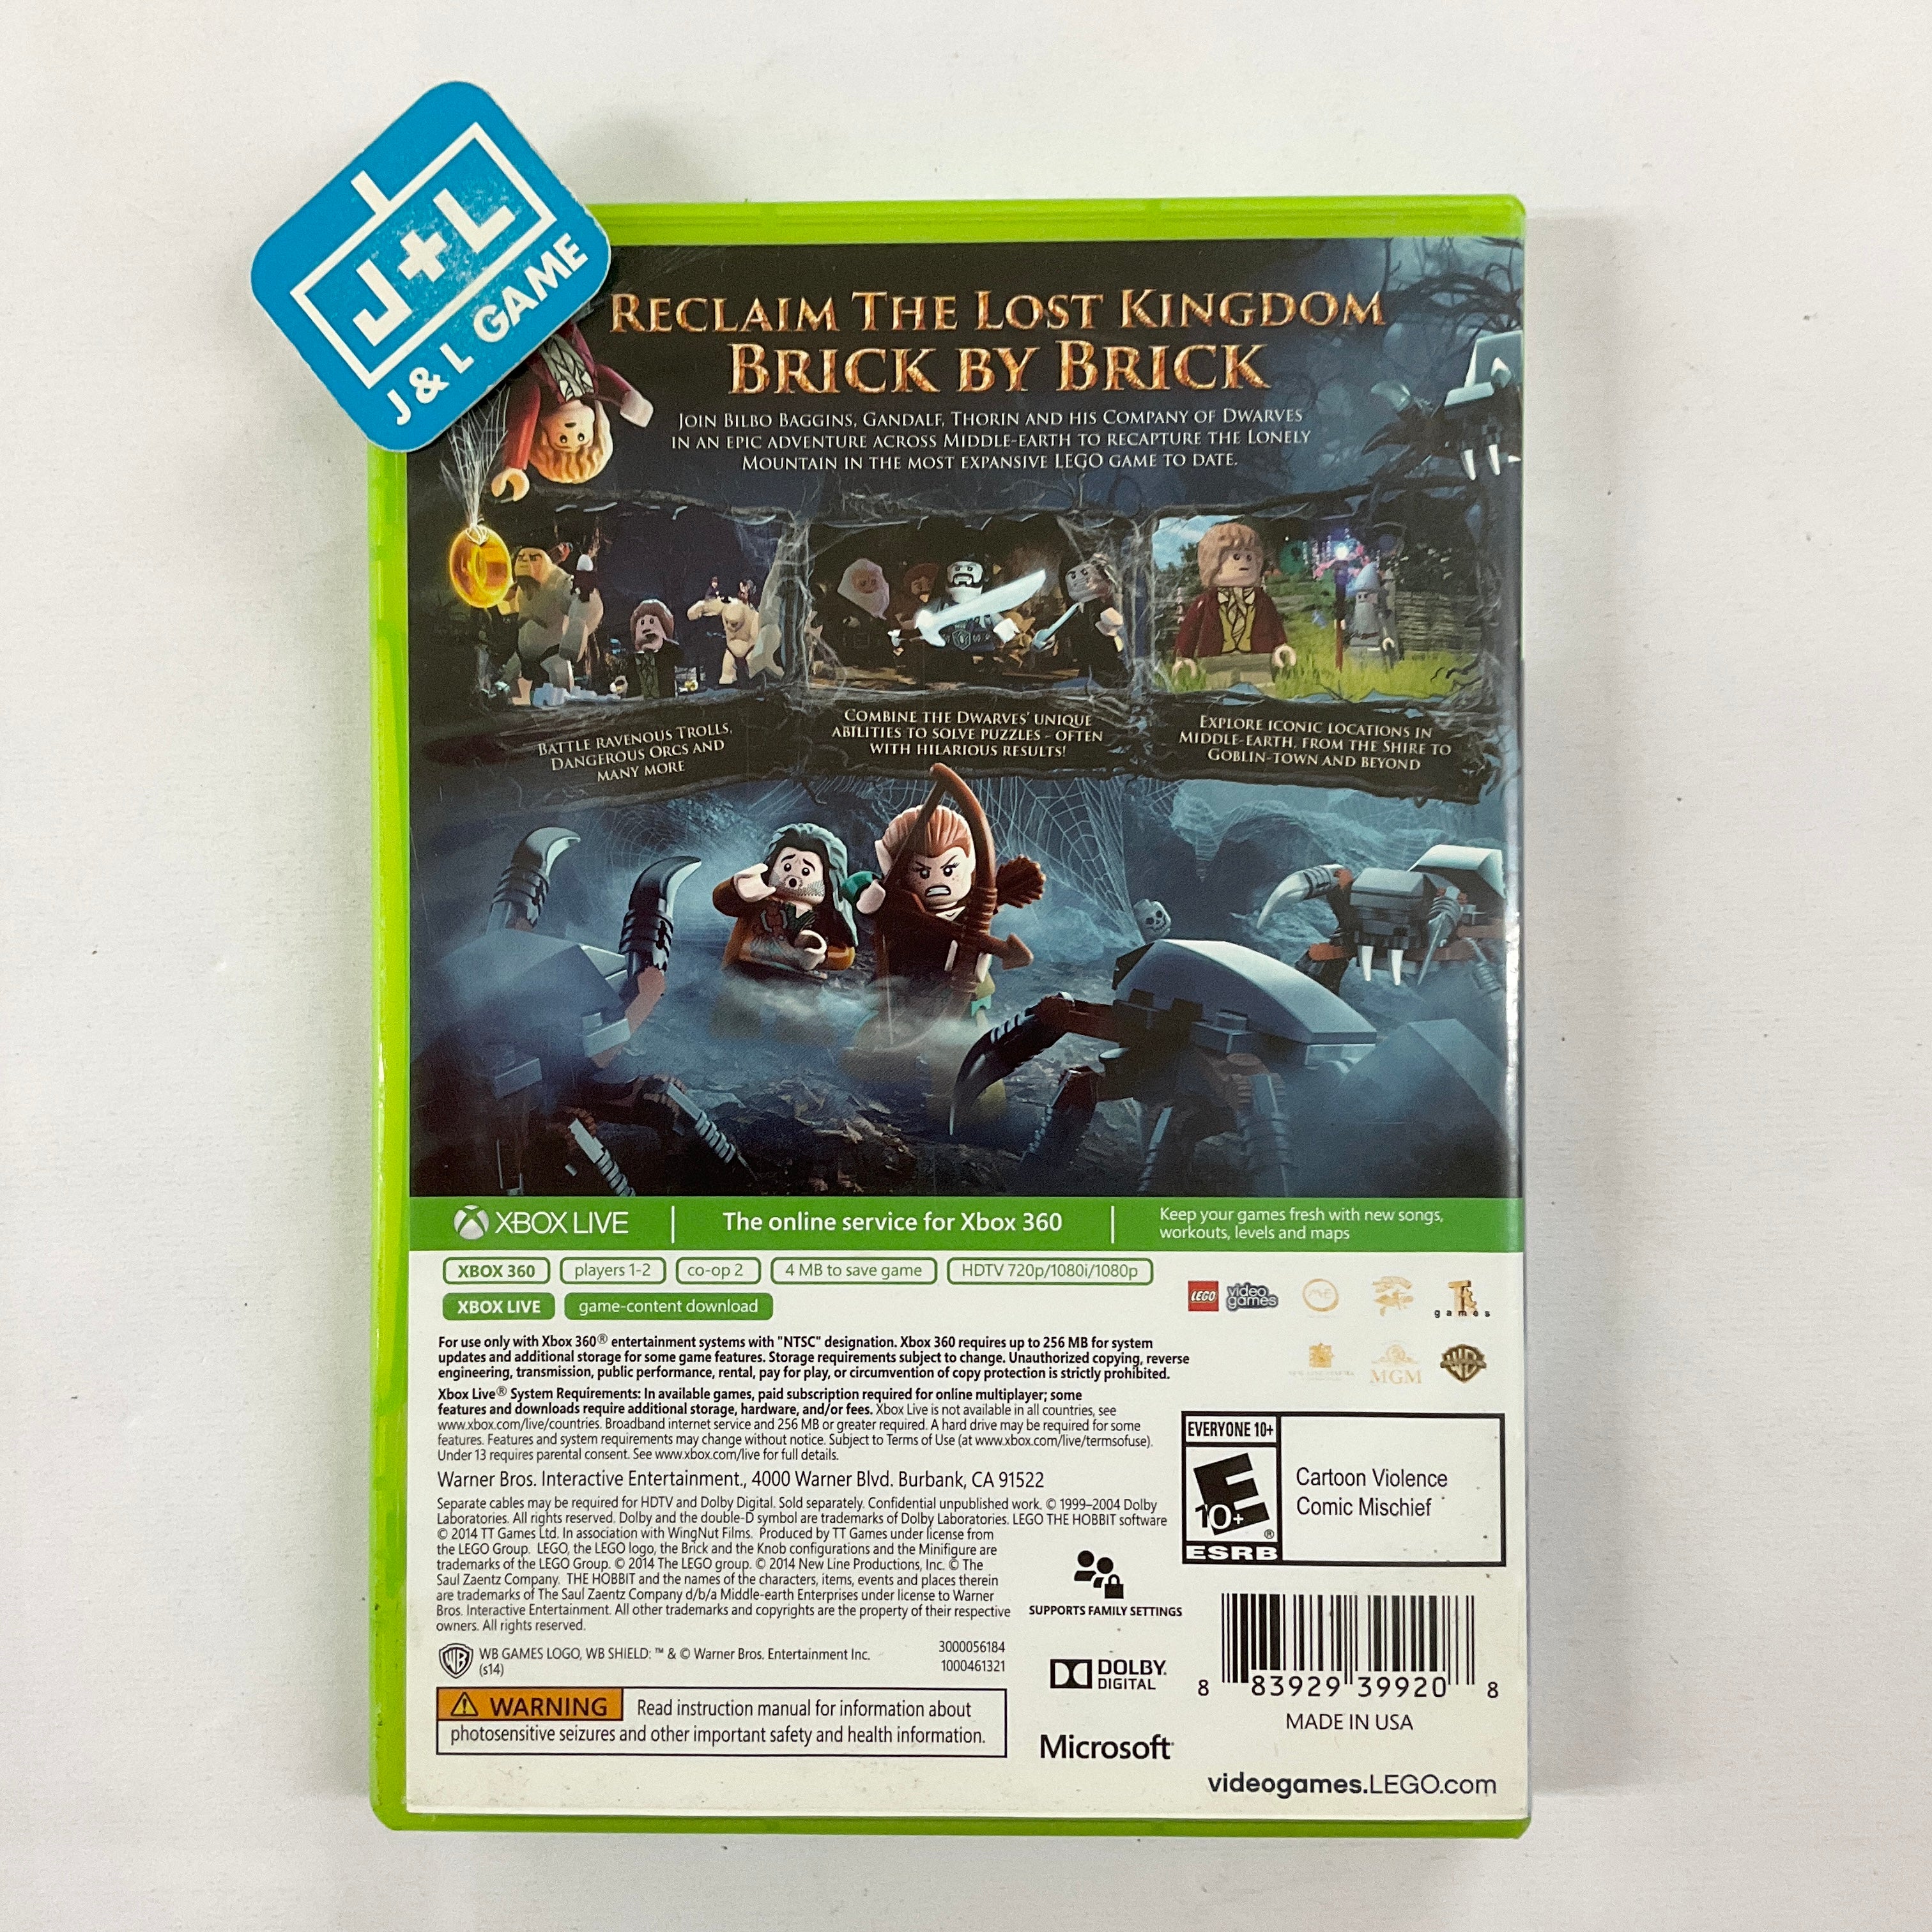 LEGO The Hobbit - Xbox 360 [Pre-Owned] Video Games Warner Bros. Interactive Entertainment   